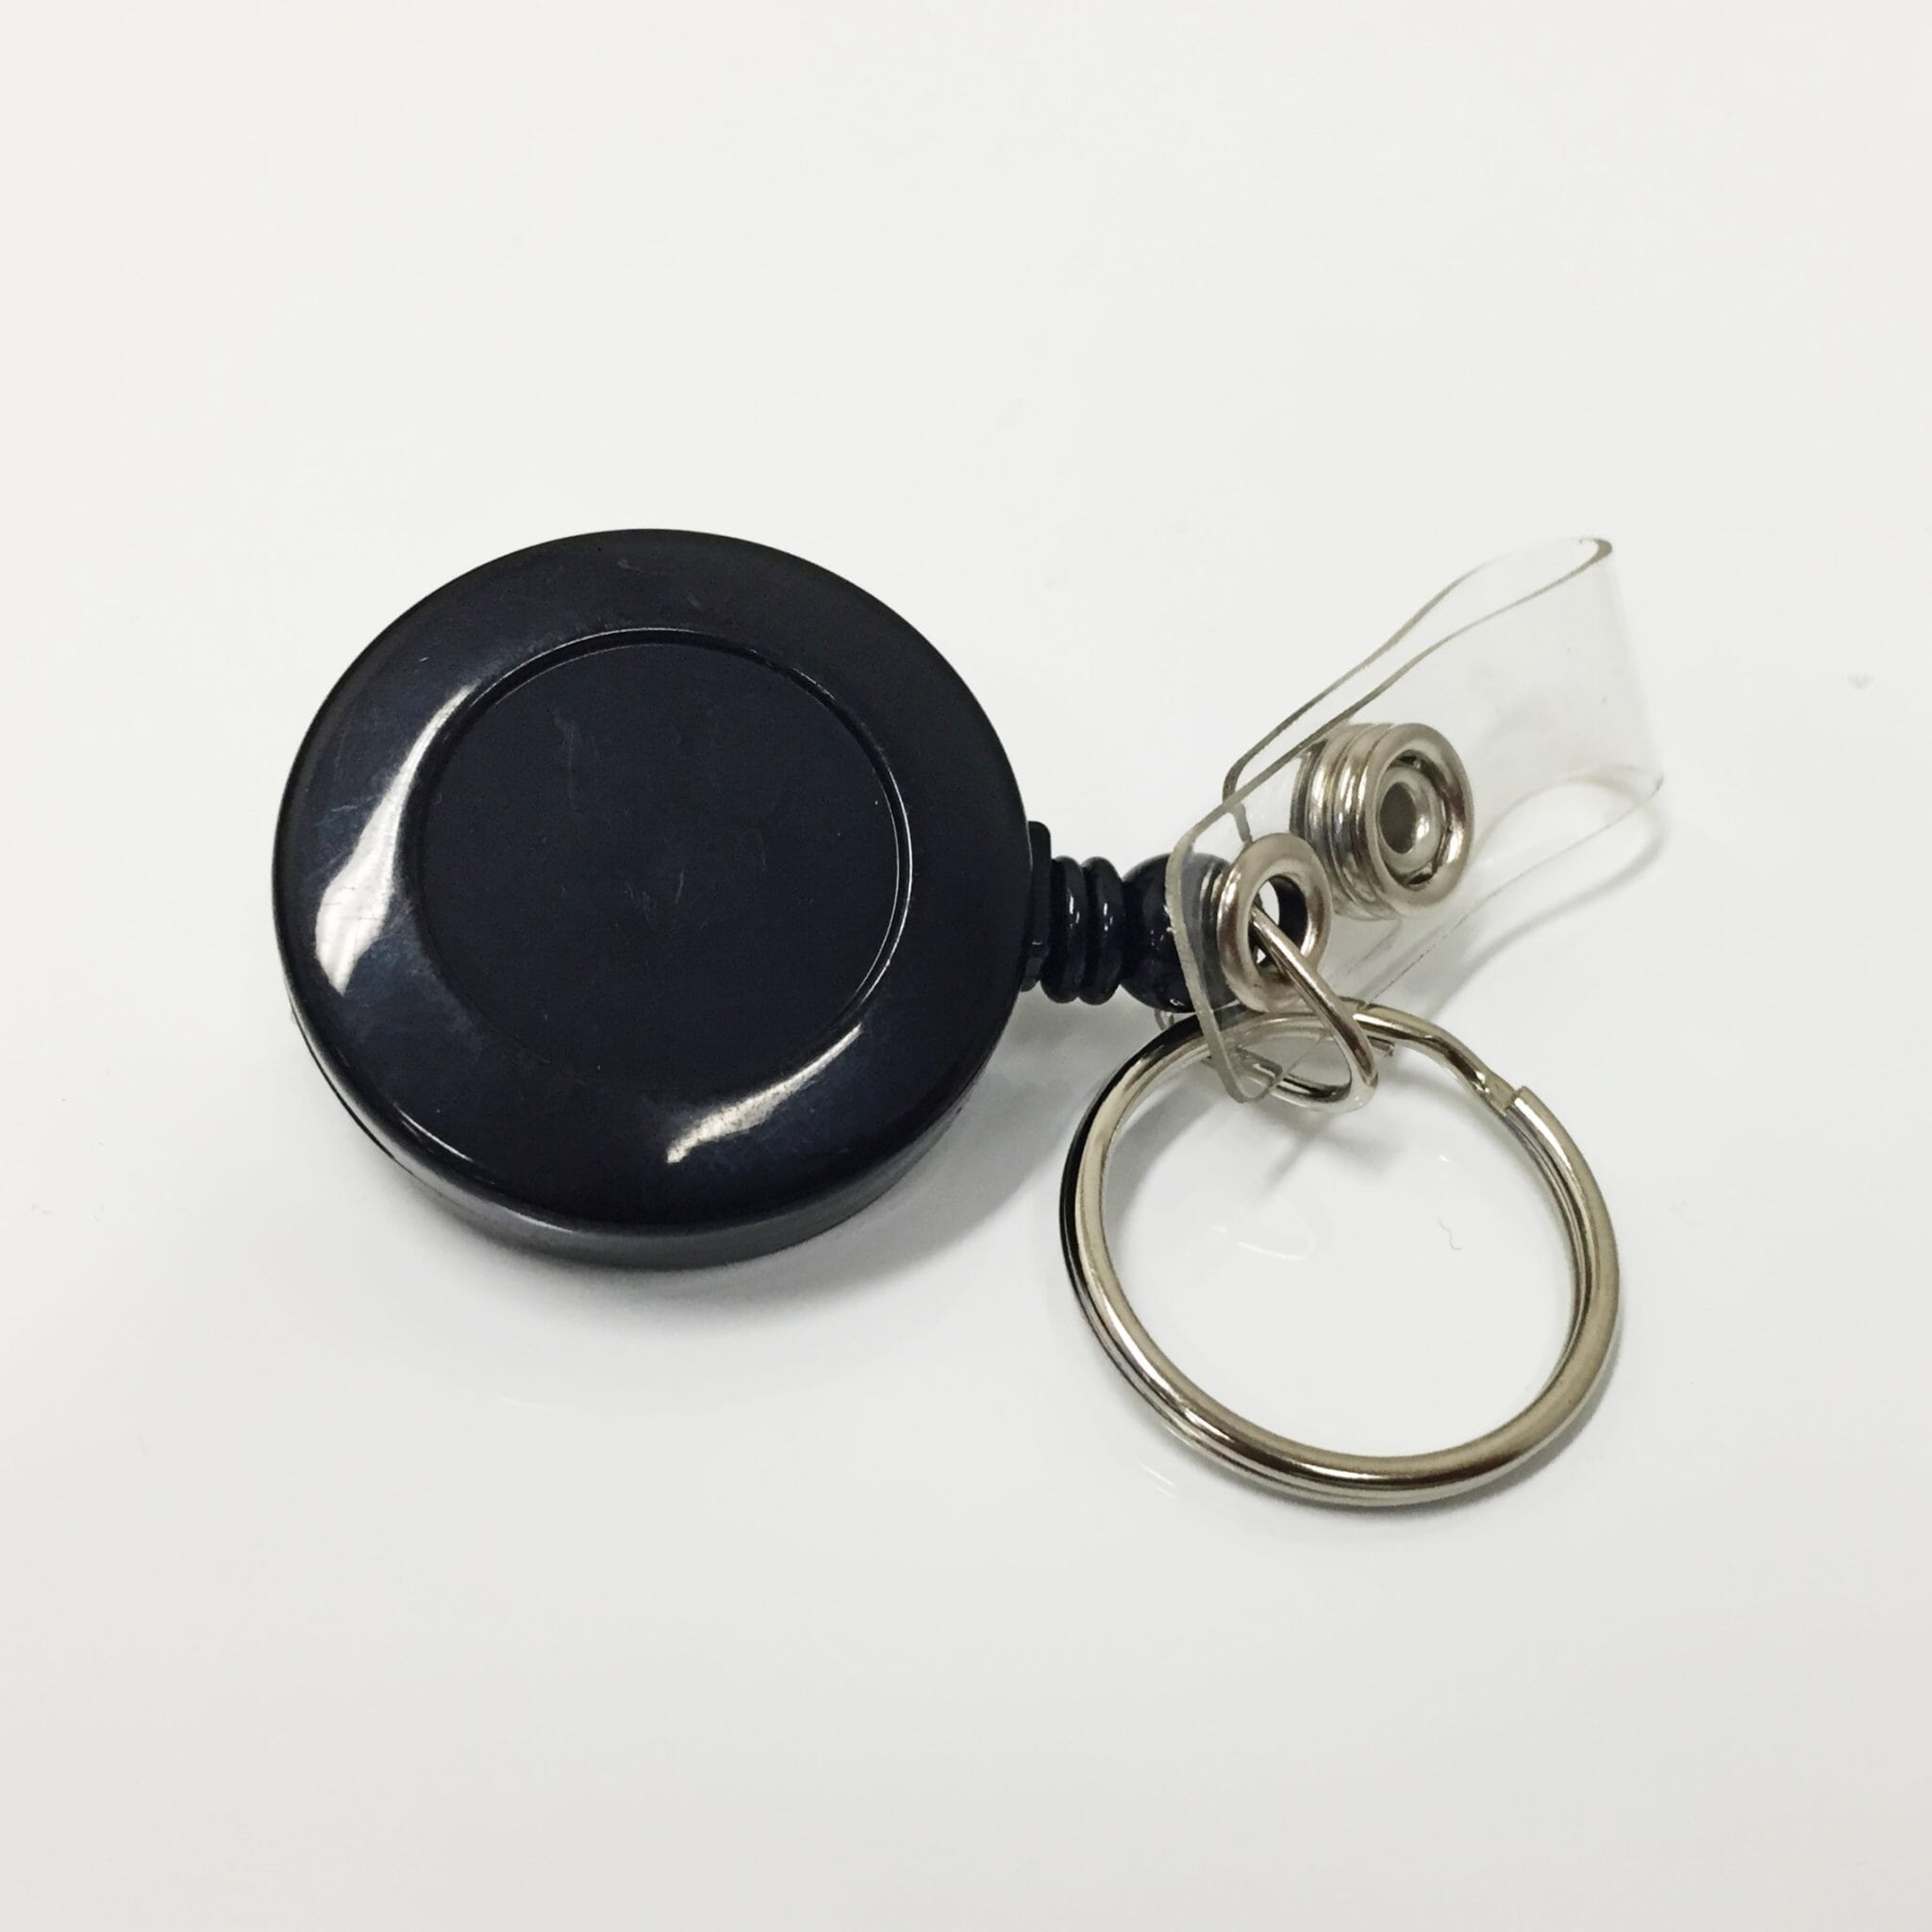 Black Economy Reel with Belt Clip & Strap Clip (60cm nylon cord with a key ring & a clear vinyl strap clip).